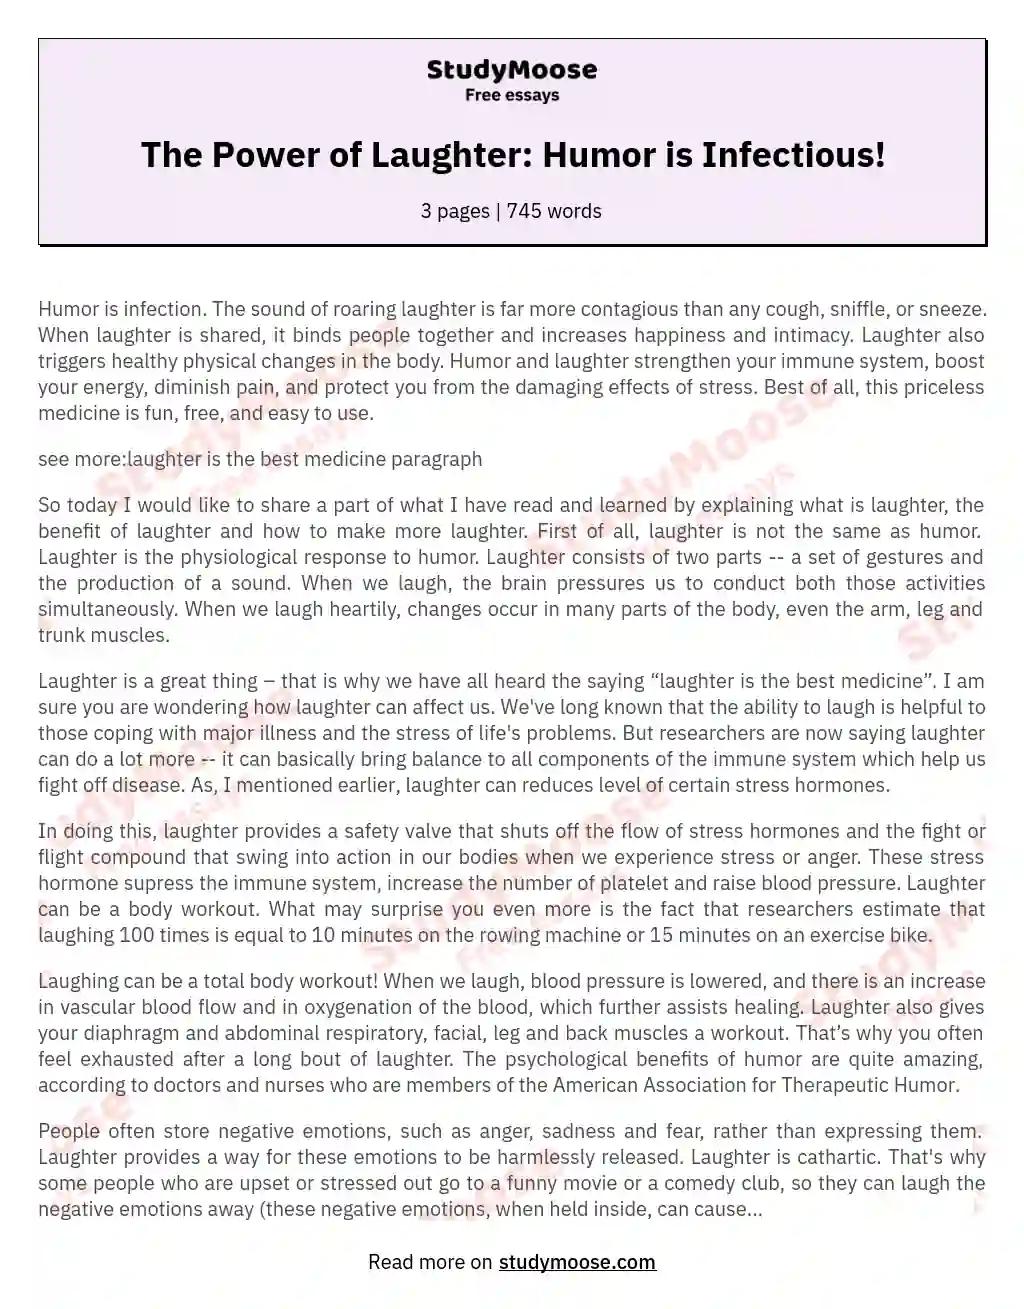 The Power of Laughter: Humor is Infectious! essay